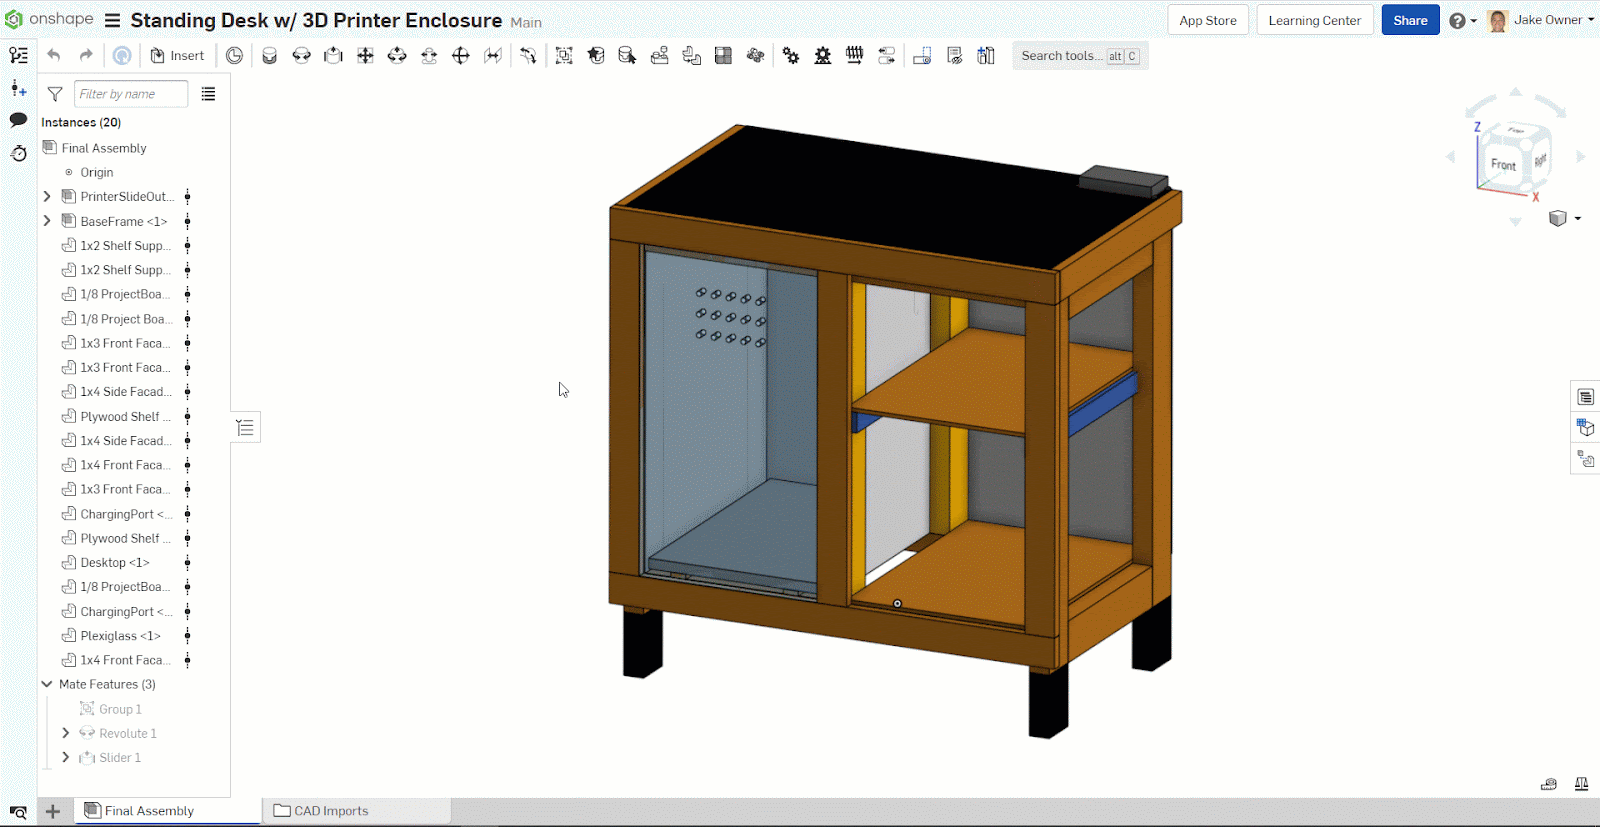 Gif showing how to use Fix to designate a part to be fixed to ground in an assembly